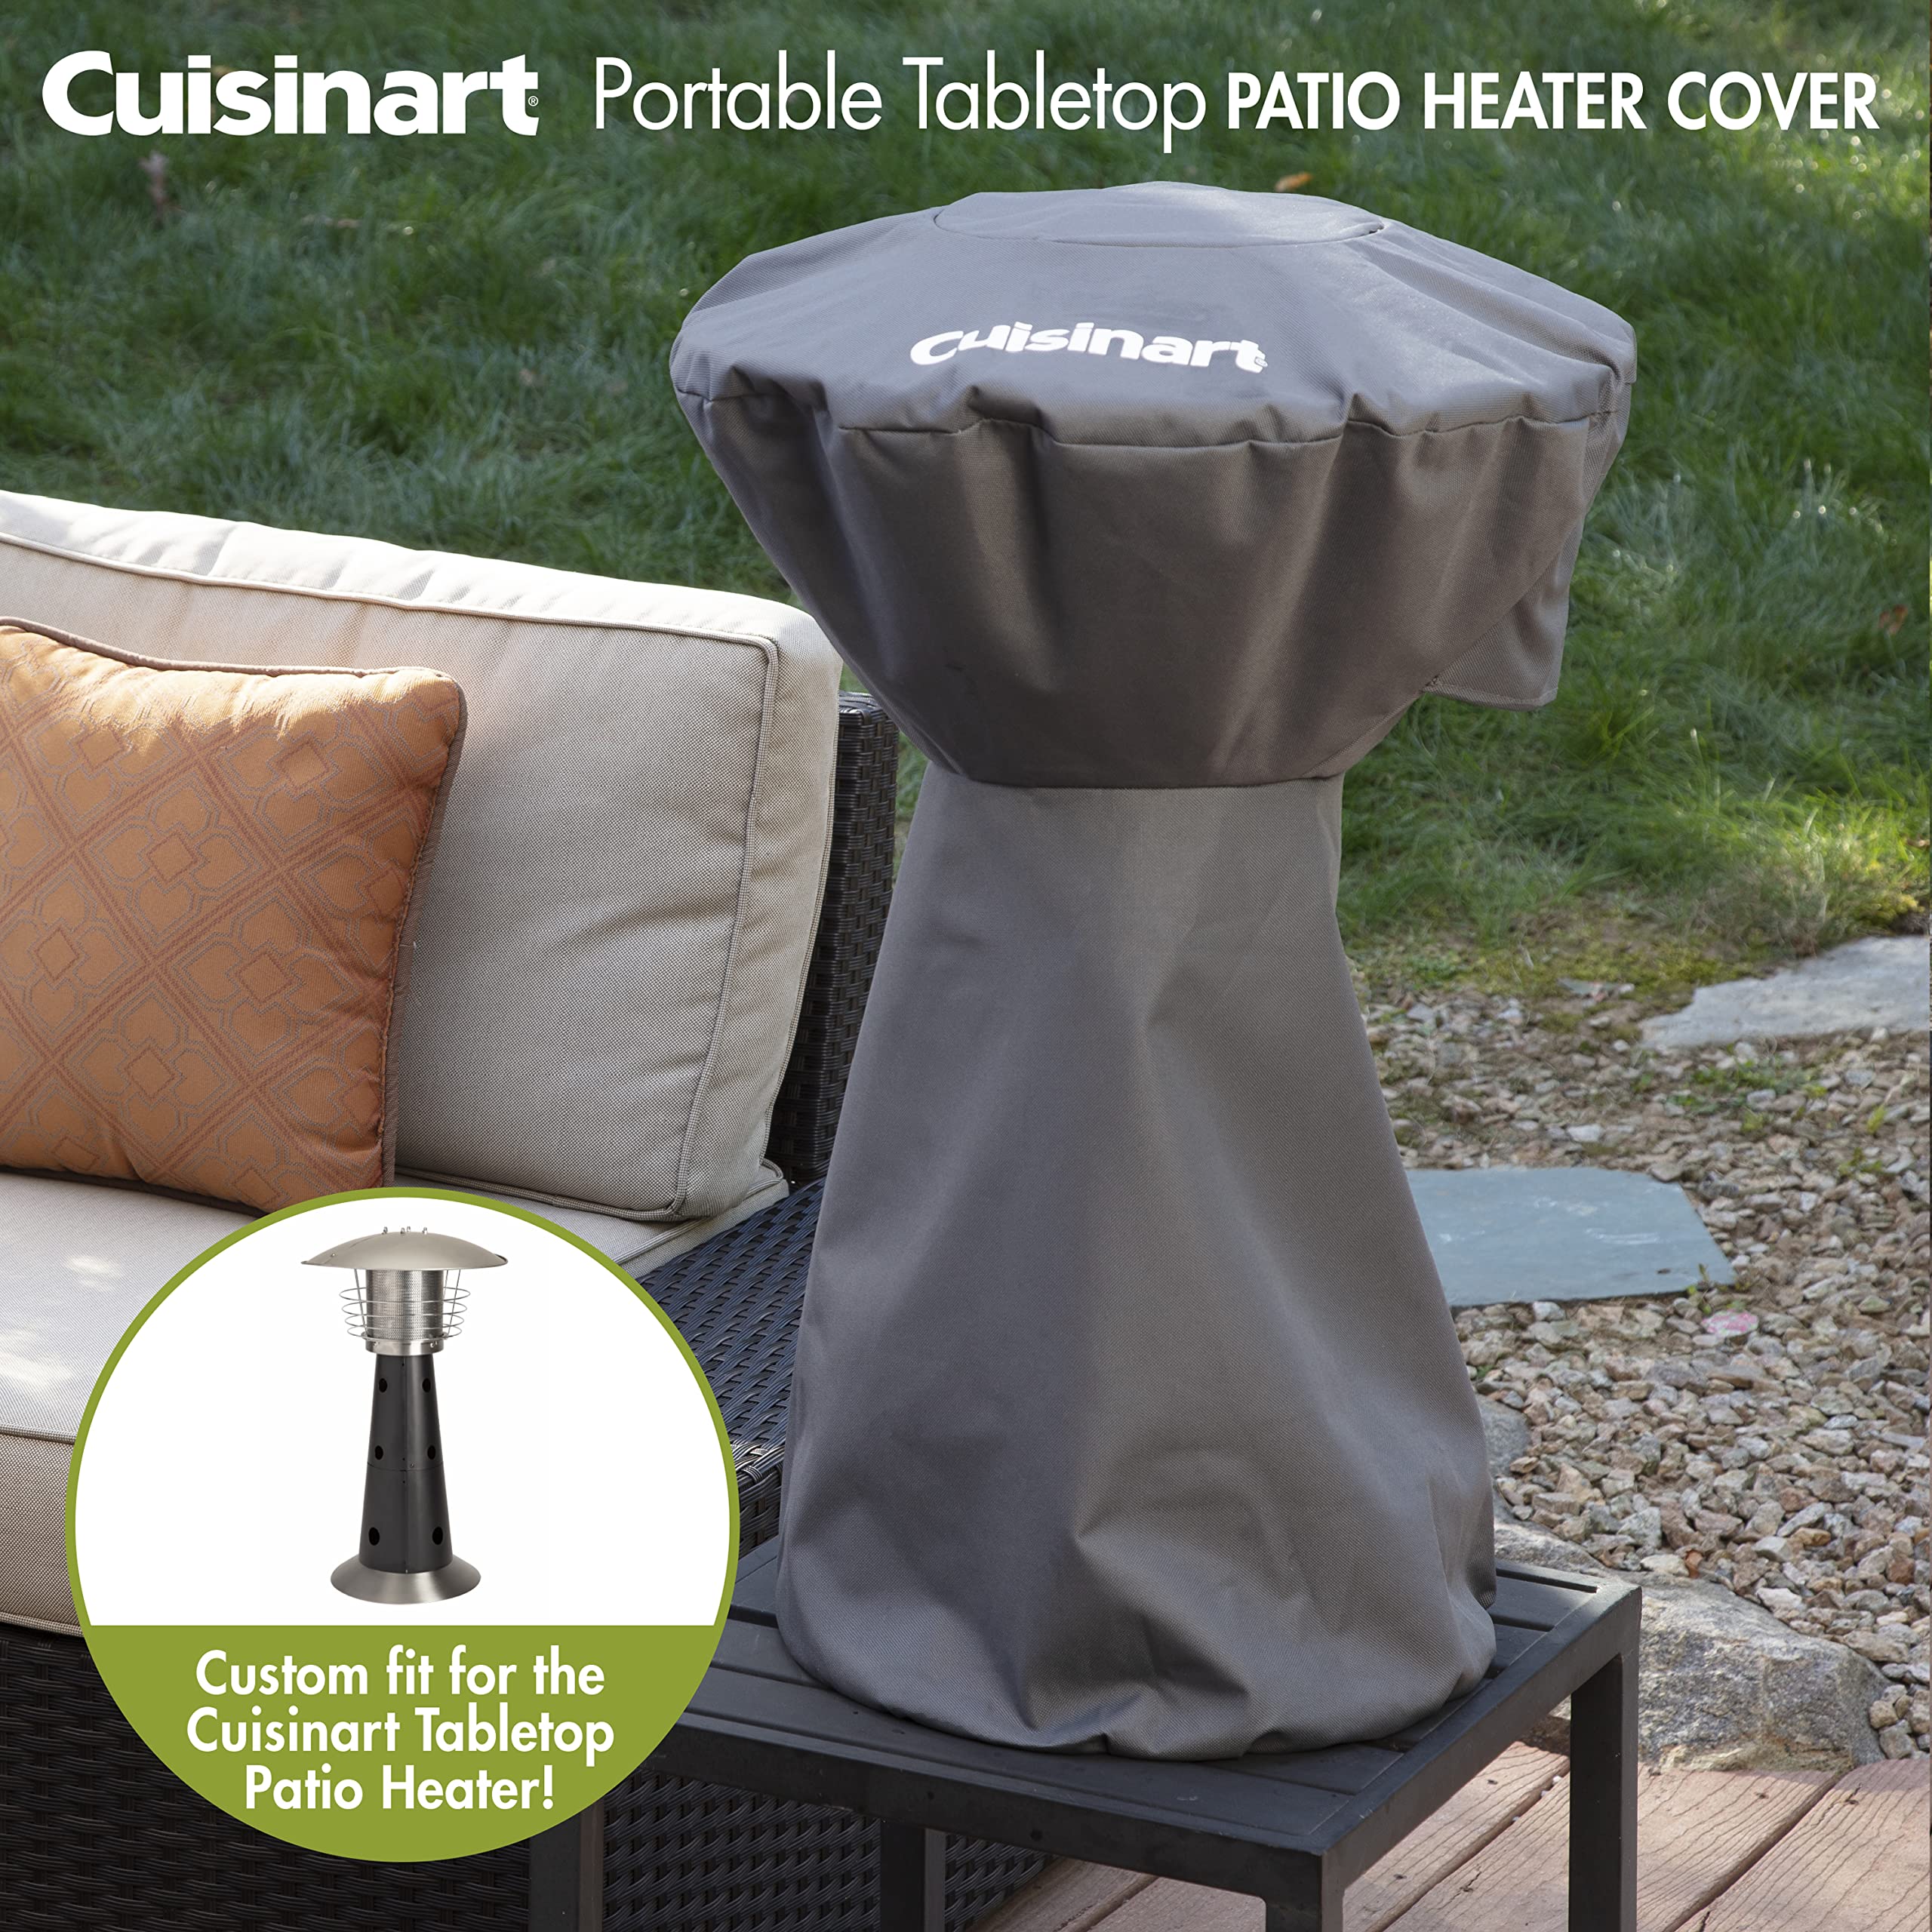 Cuisinart CHC-501 Tabletop Patio Heater, Durable Rip-Resistant Polyester (Cover Fits COH-500), 18.9" x 18.9" x 25"